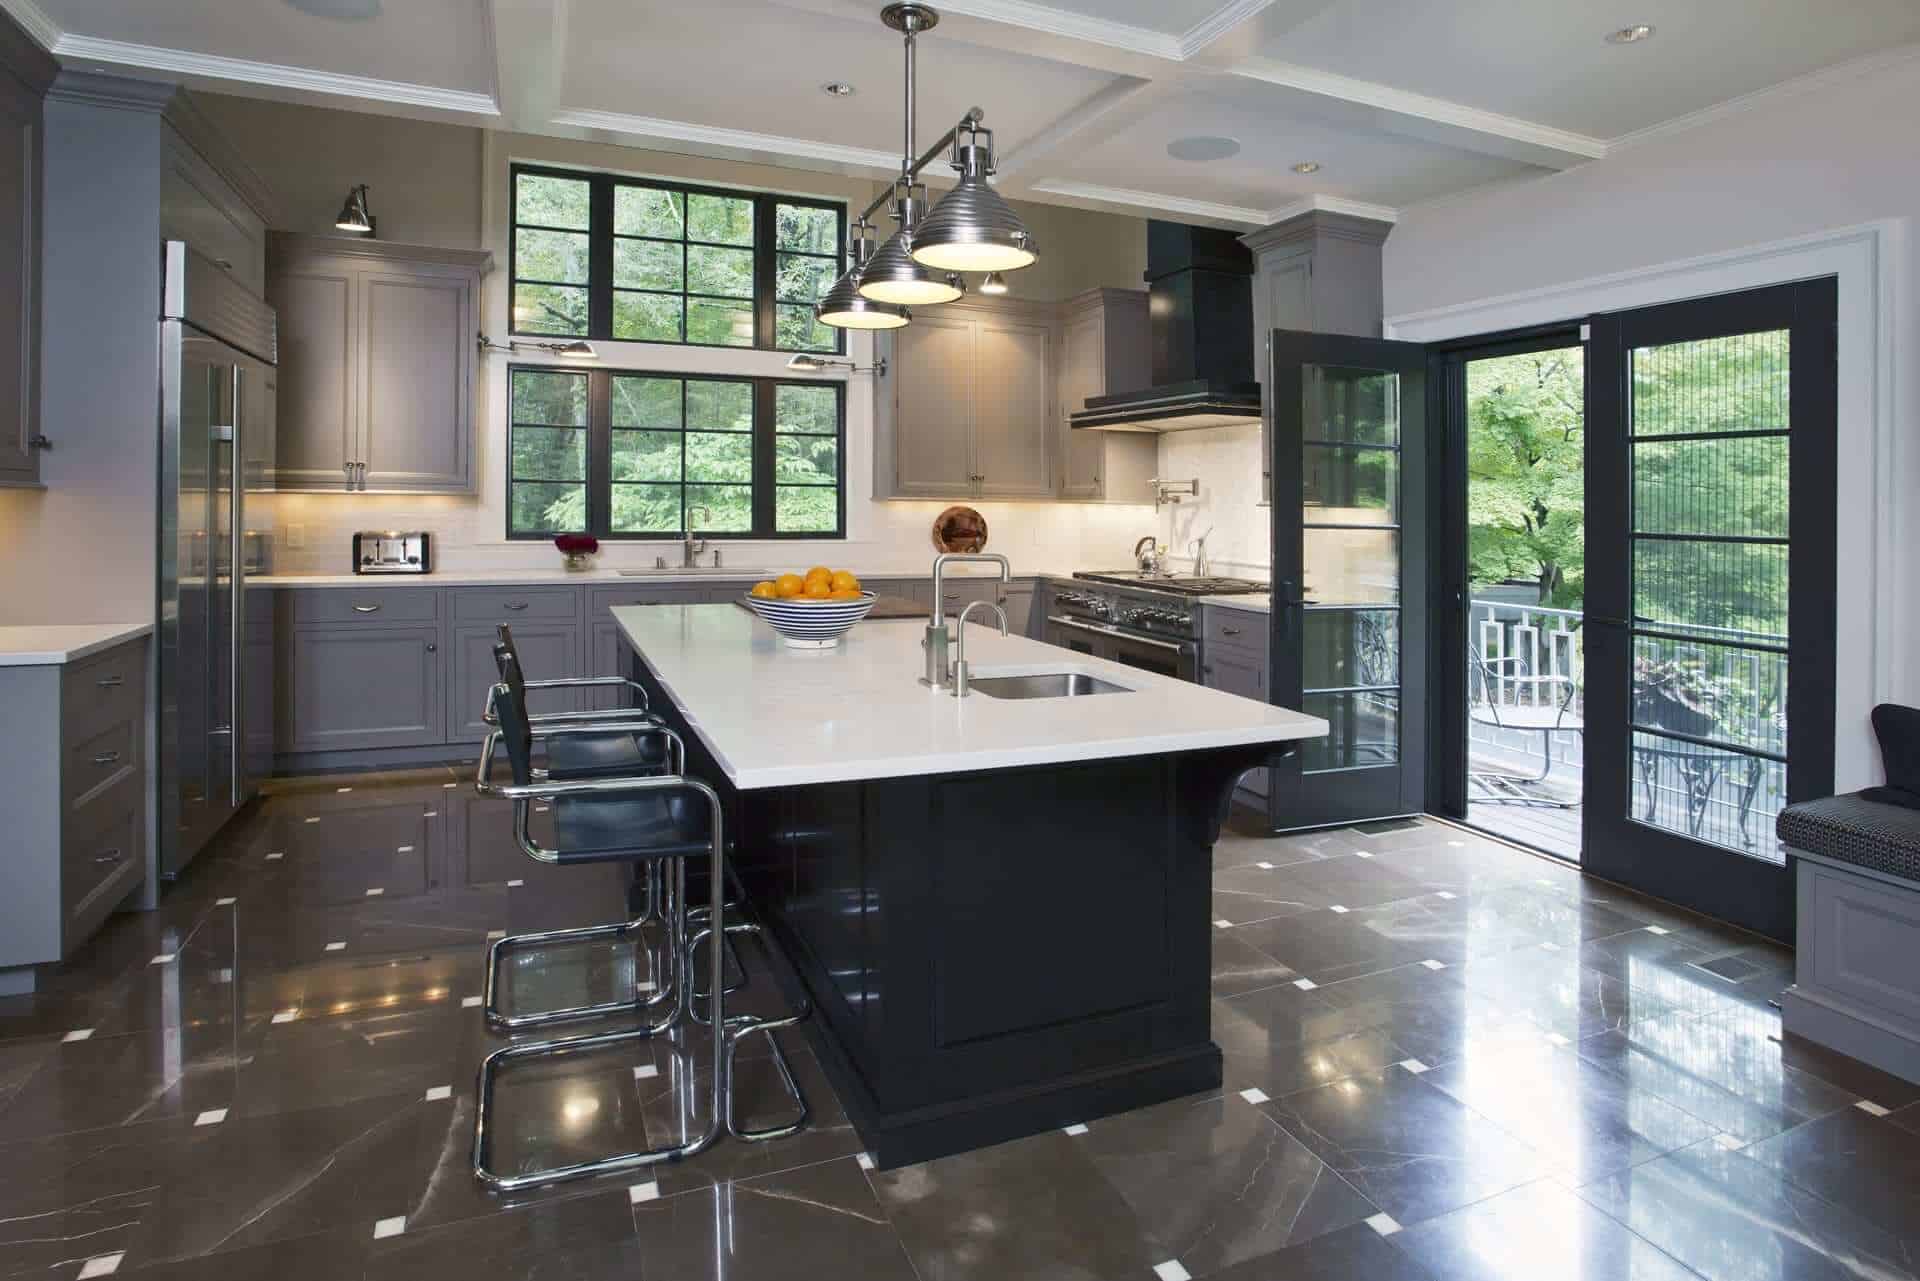 Kitchen features Bilotta gray-painted cabinetry, large center island and custom Rangecraft madison hood with dark antique steel finish.